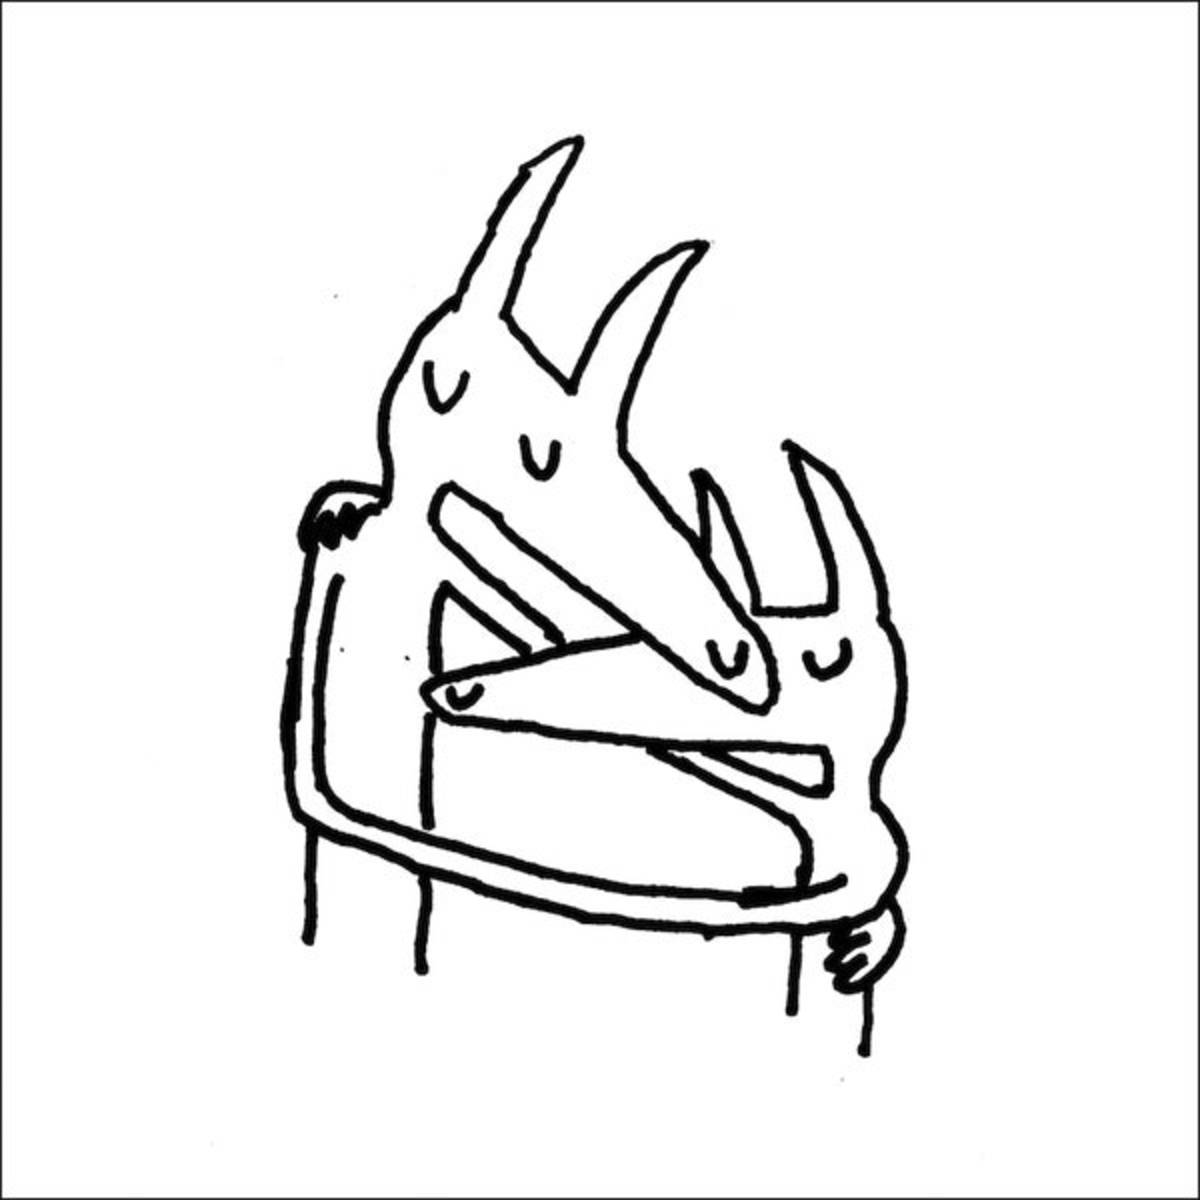 Twin Fantasy (Face to Face): A Complete Album Analysis of Car Seat Headrest's 2018 Project.